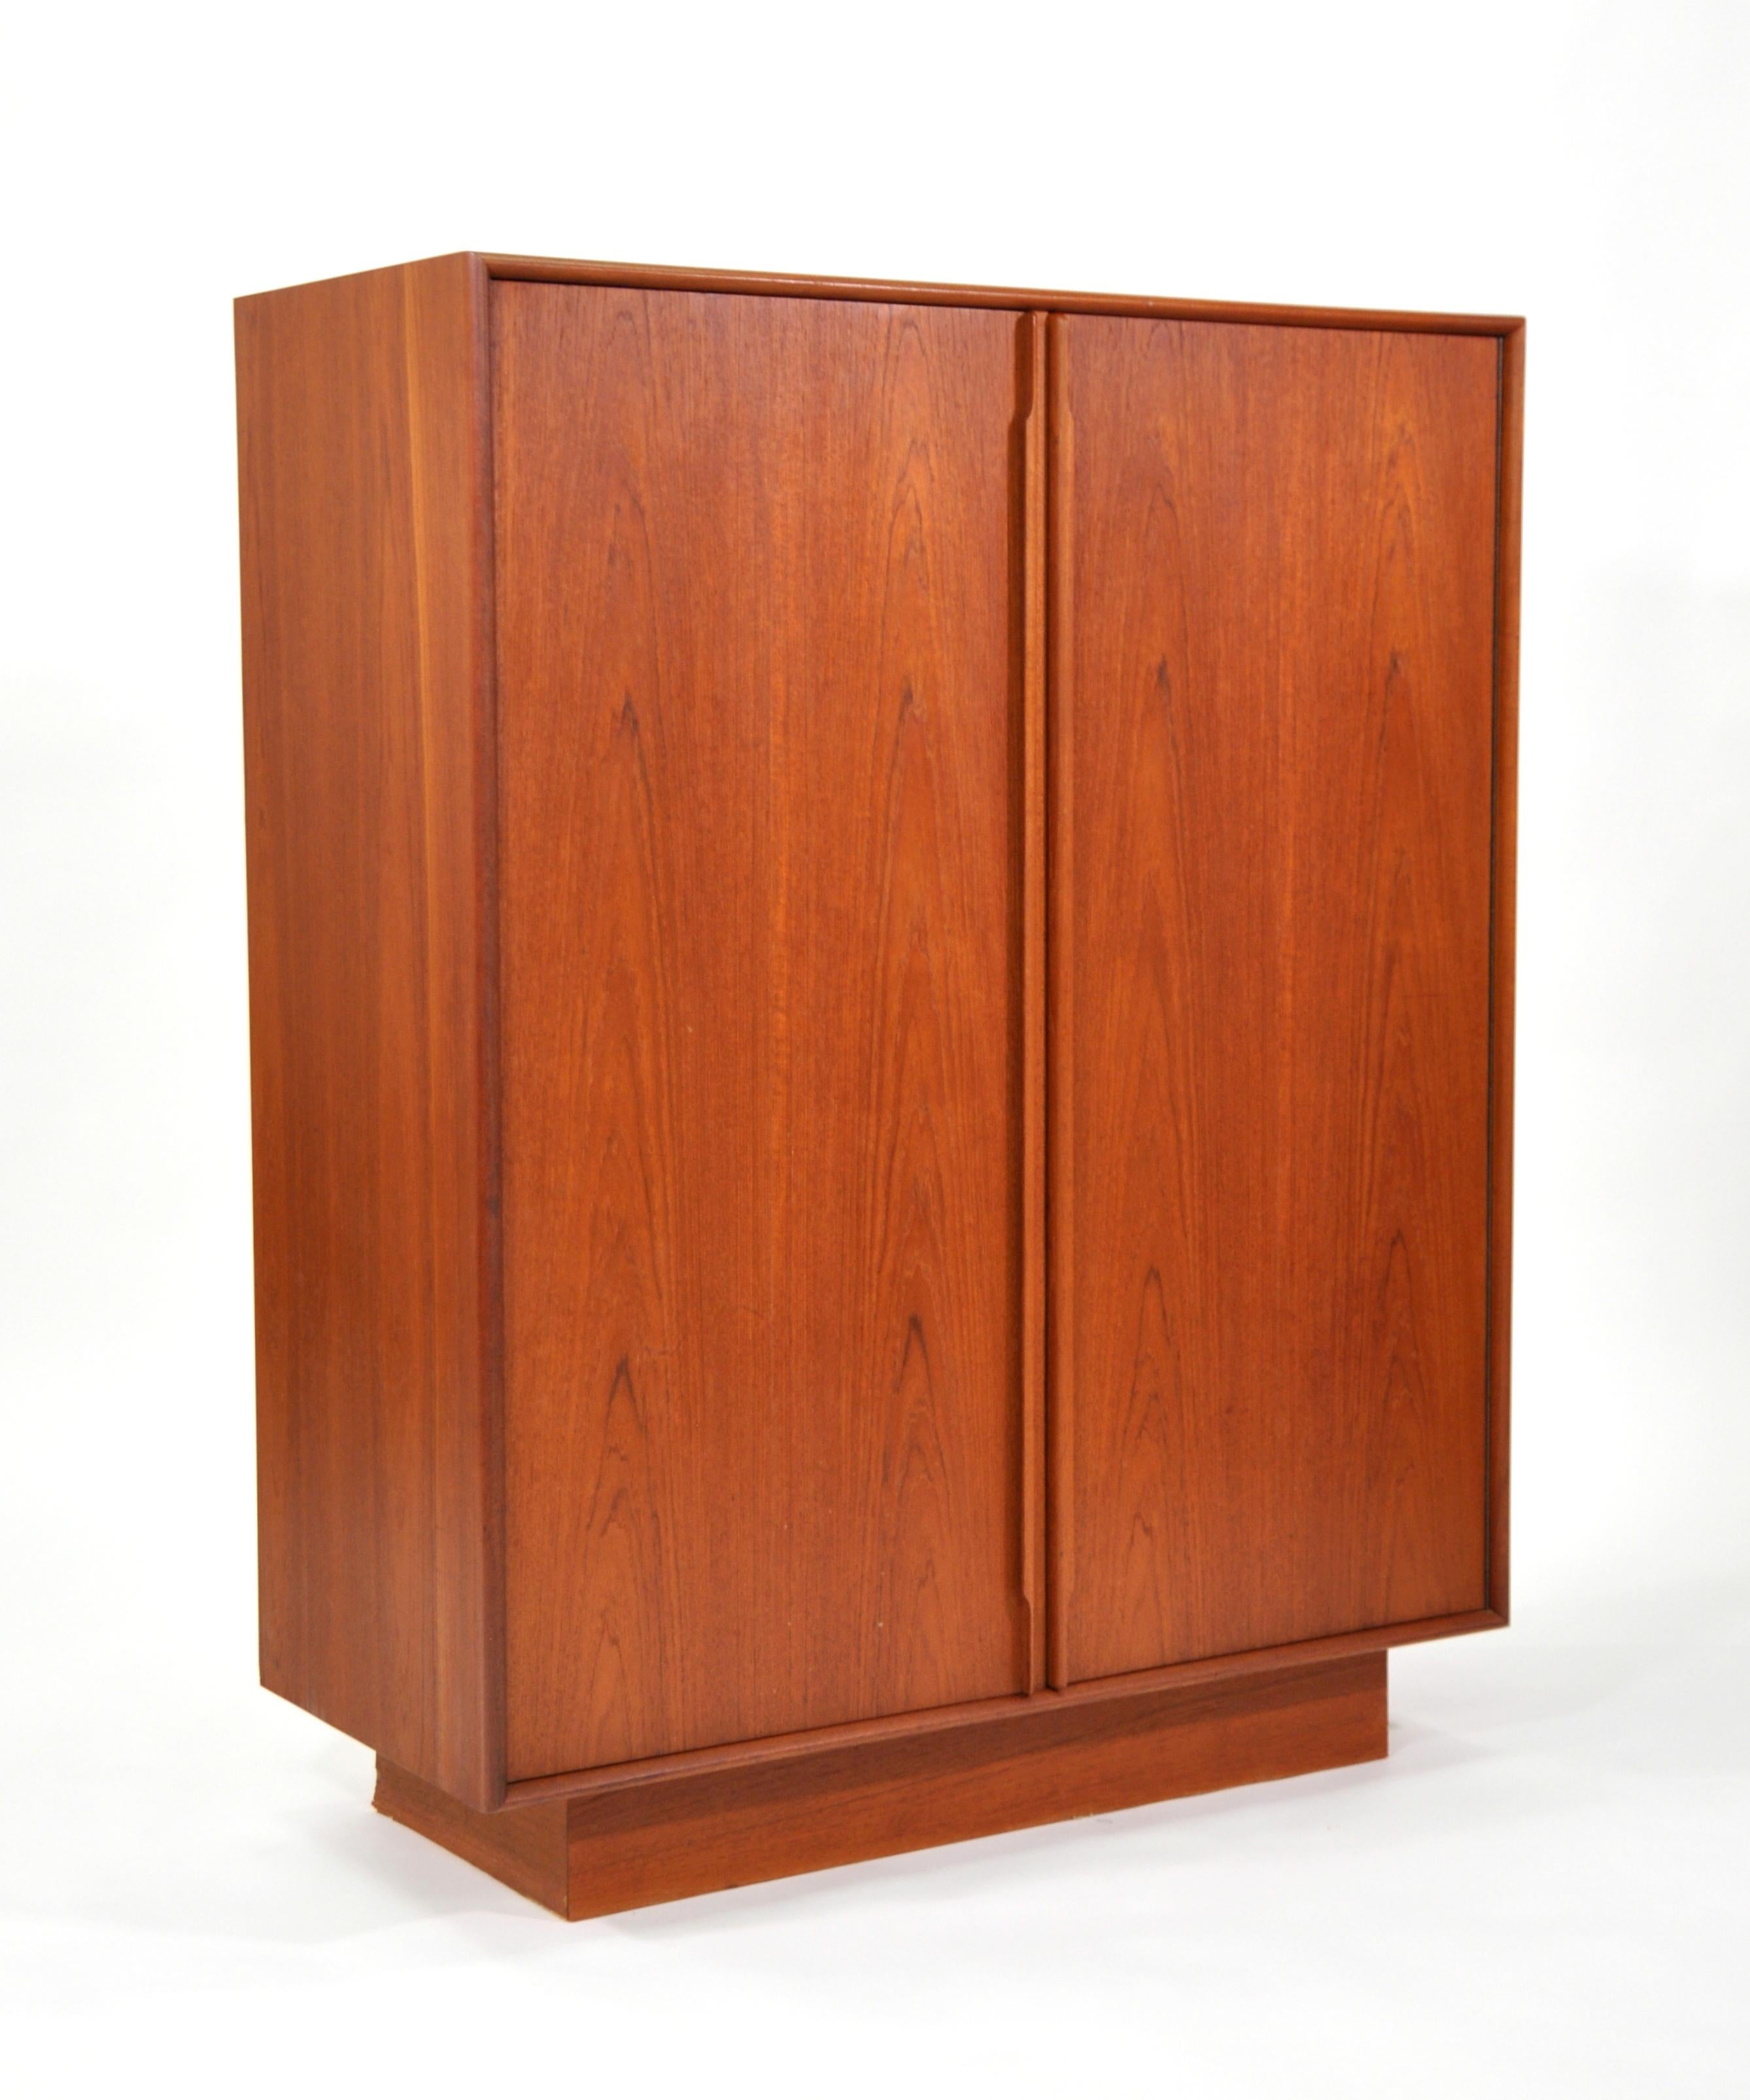 Both gorgeous and functional, this Scandinavian Modern bachelor's chest of drawers dates from the 1970s. With a total of 6 drawers and three shelves, it provides a ton of storage space. The vintage gentleman's wardrobe features beautifully sculpted